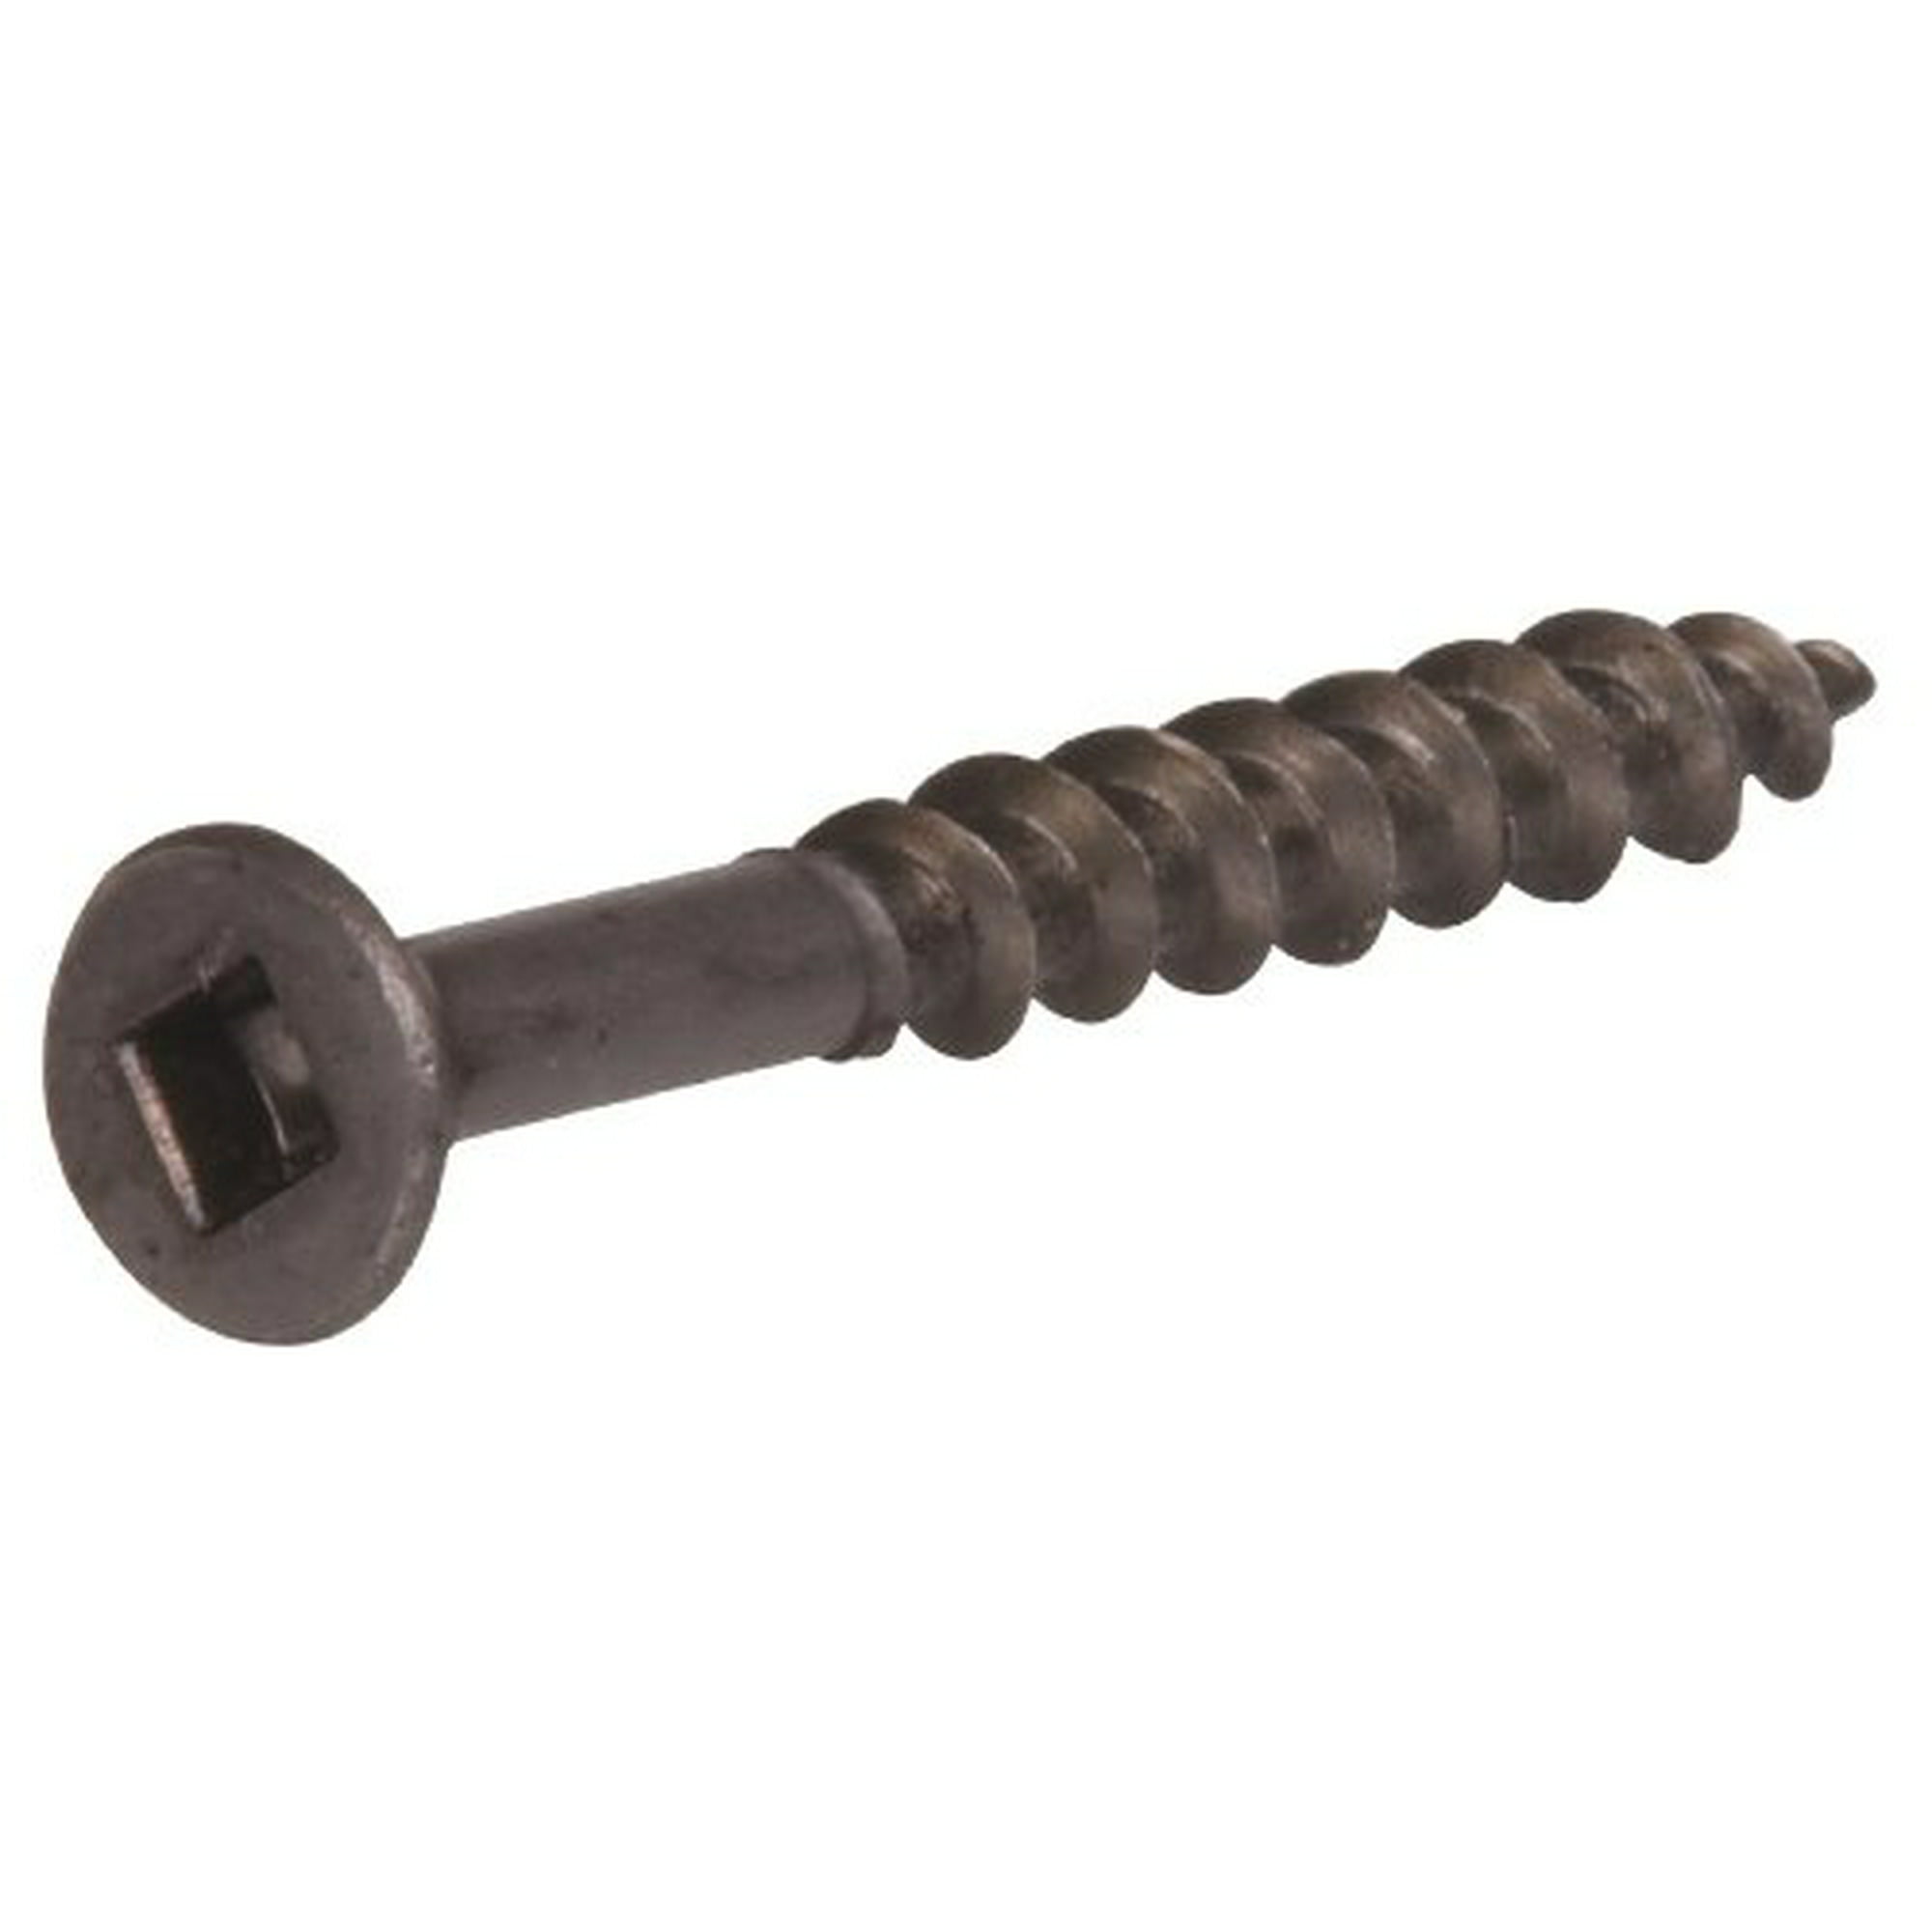 The Hillman Group 967669 8 X 1-1/4-Inch Square Head Flooring Screw 4800-Pack 